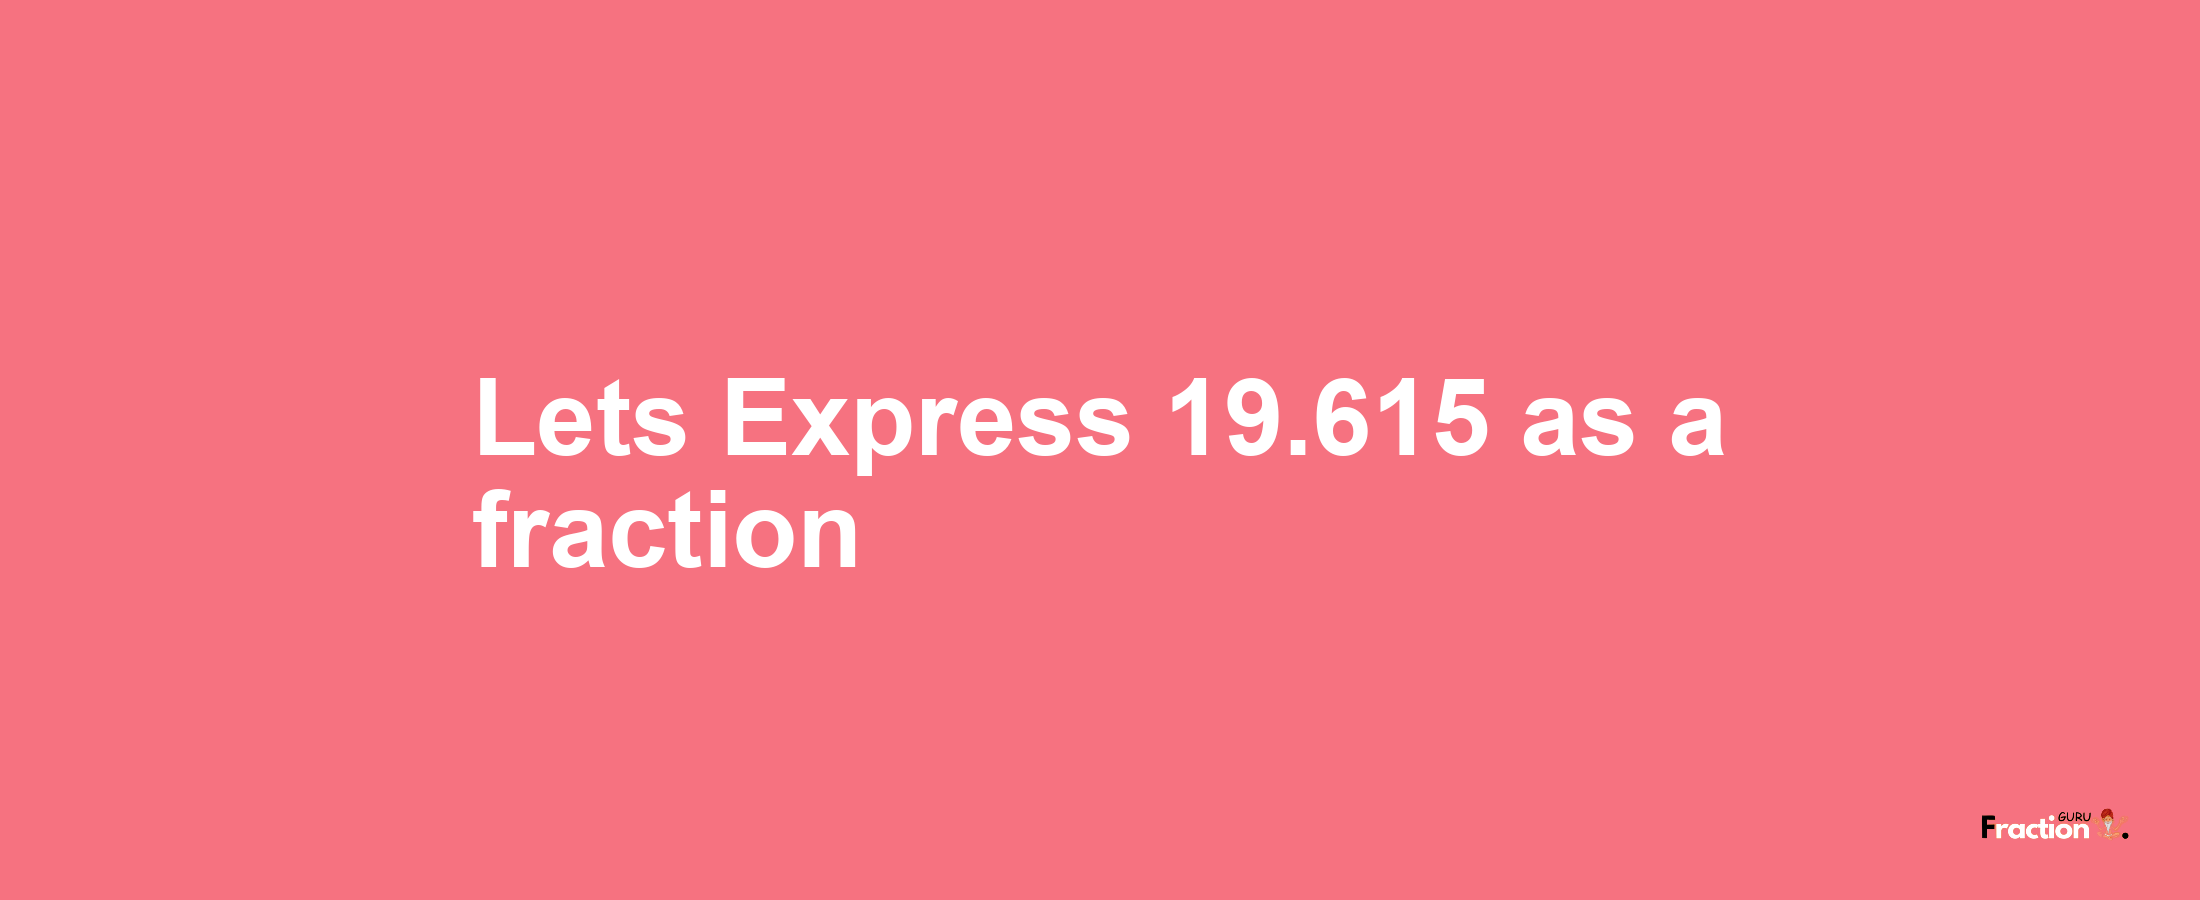 Lets Express 19.615 as afraction